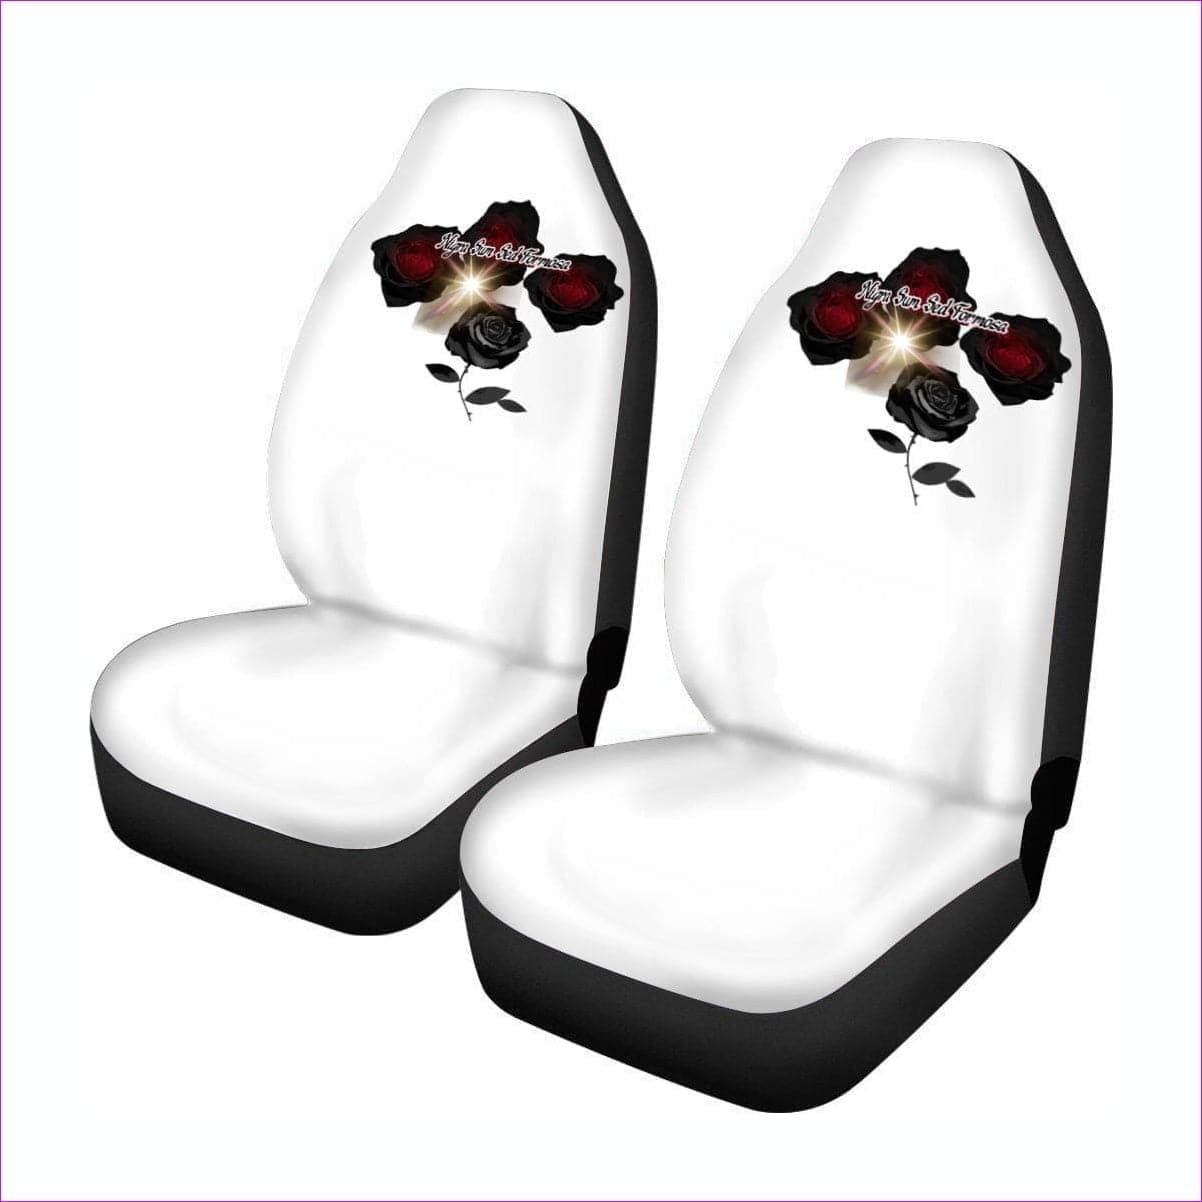 U White Nigra Sum Sed Formosa Universal Car Seat Cover - Vehicle Parts & Accessories at TFC&H Co.